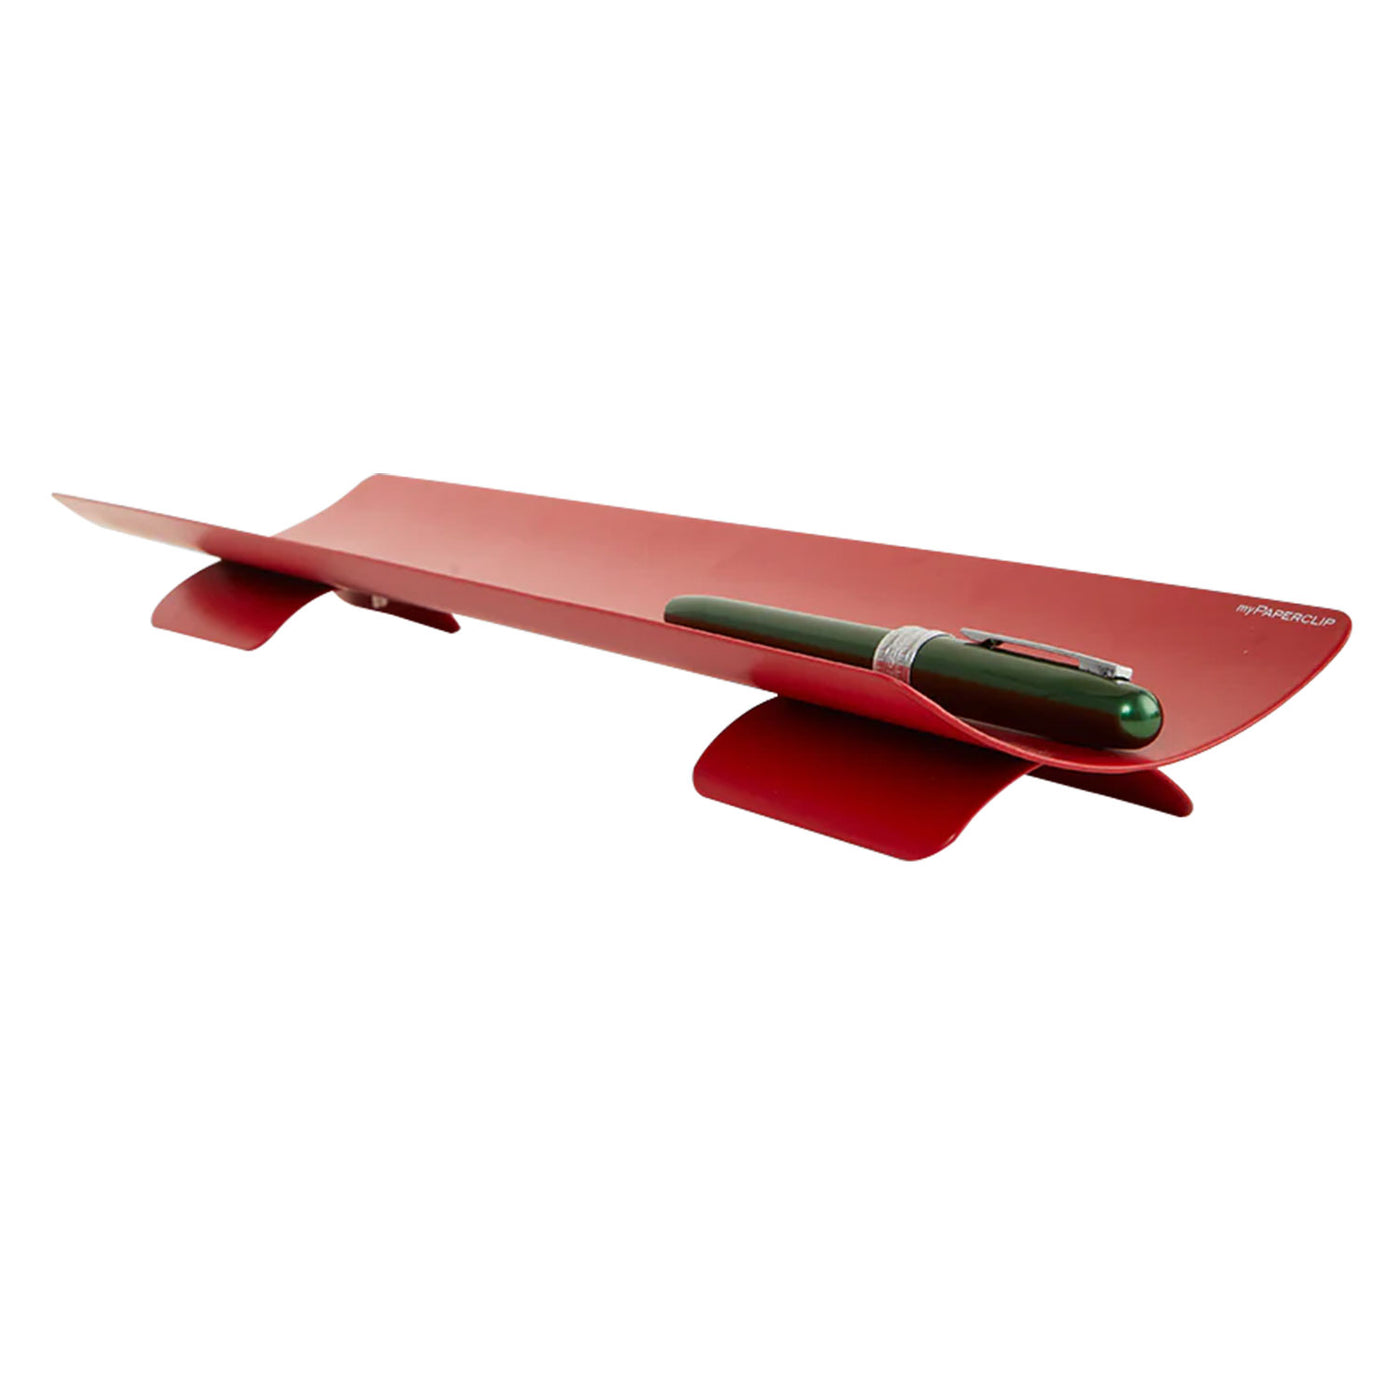 myPAPERCLIP Large Metal Tray - Red 1